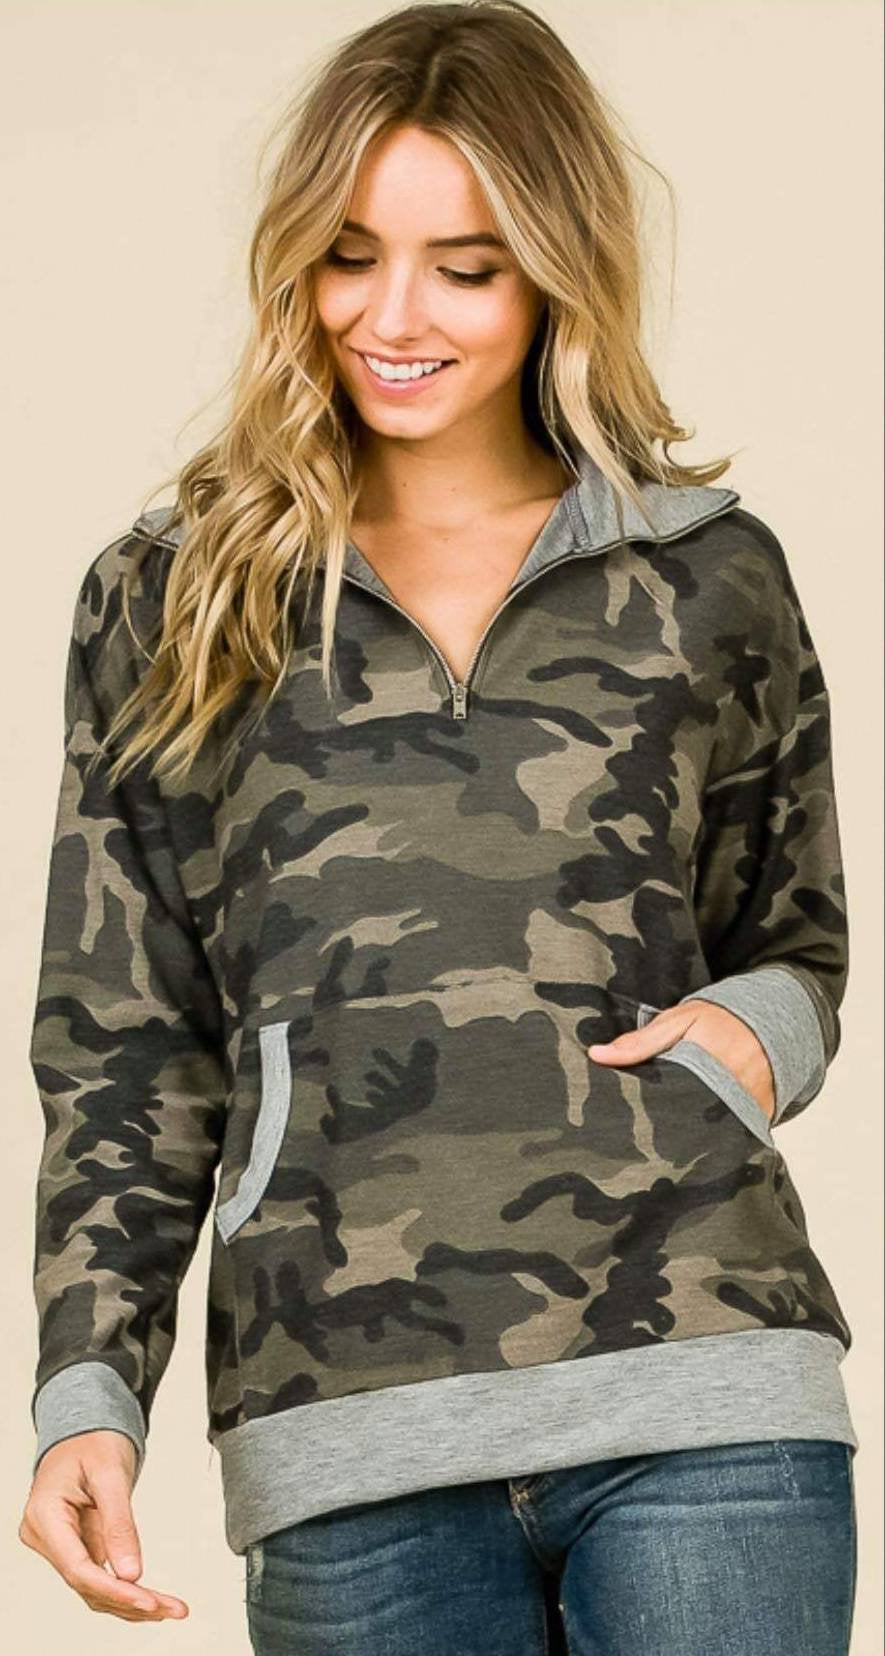 Monogrammed Camo 1/4 Zip Pullover - Embroidered Women's Camouflage Quarter Zip Up Sweatshirt, Personalized Hunting Pullovers, Monograms